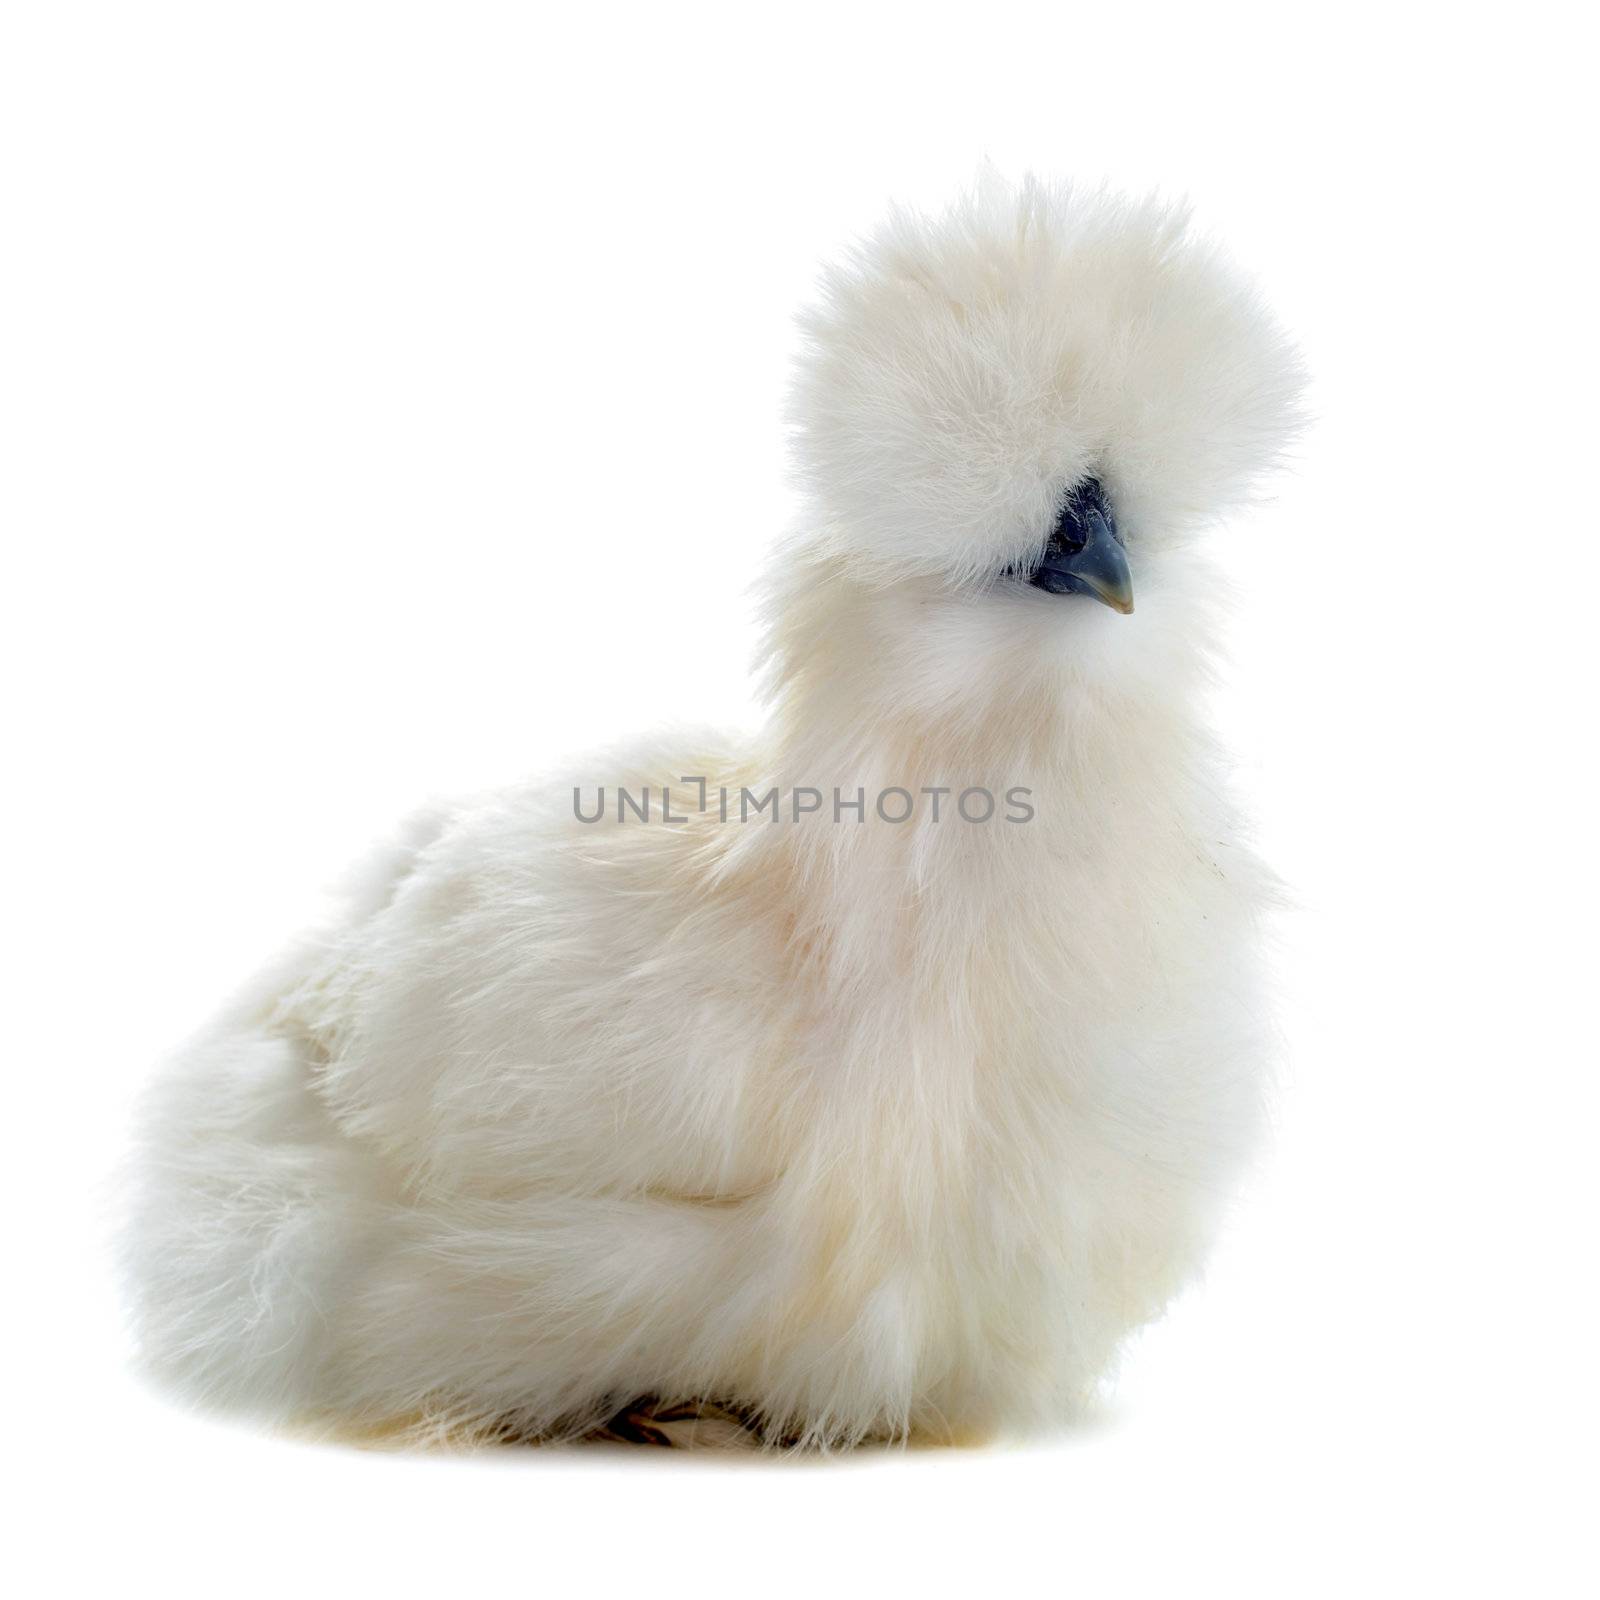 A small bantam silkie on a white background